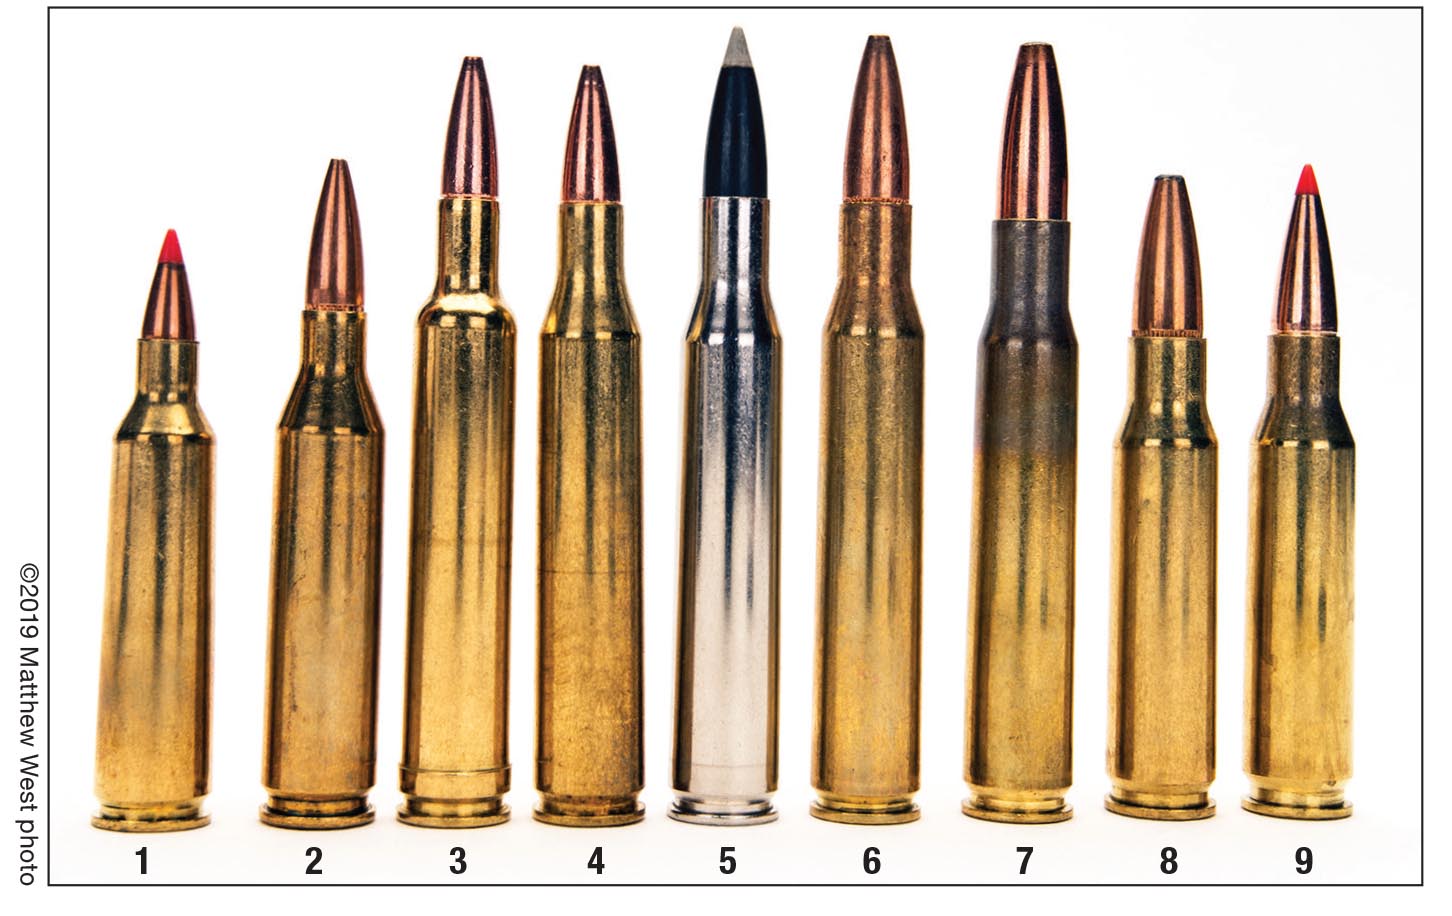 The Sporter was chambered for several cartridges that include the (1) .22-250 Remington, (2) .243 Winchester, (3) .240 Weatherby Magnum, (4) .25-06 Remington, (5) .270 Winchester, (6) .280 Remington, (7) .30-06, (8) .308 Winchester and the (9) 7mm-08 Remington.